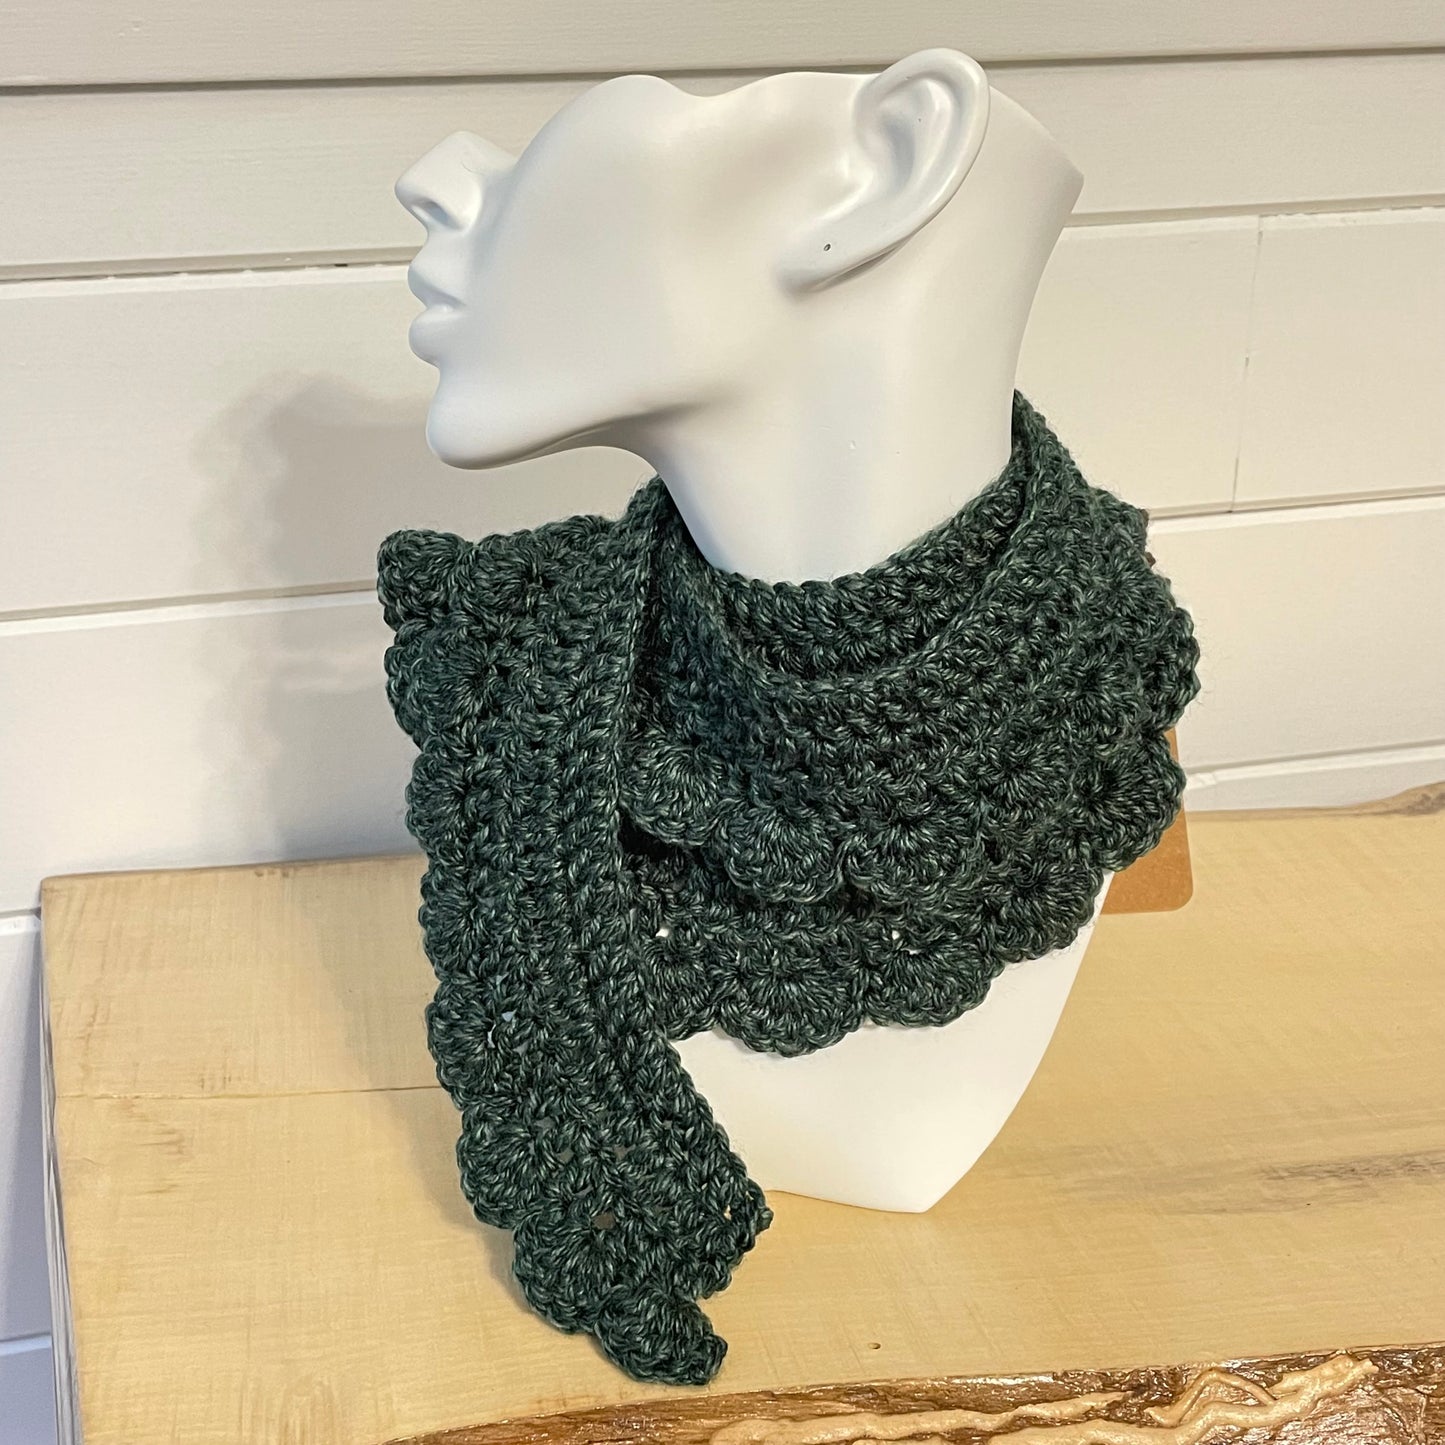 Narrow Scalloped Wrap Scarf Marbled Evergreen Crochet Knit Handmade Fall Winter--styled in a multiple wrap